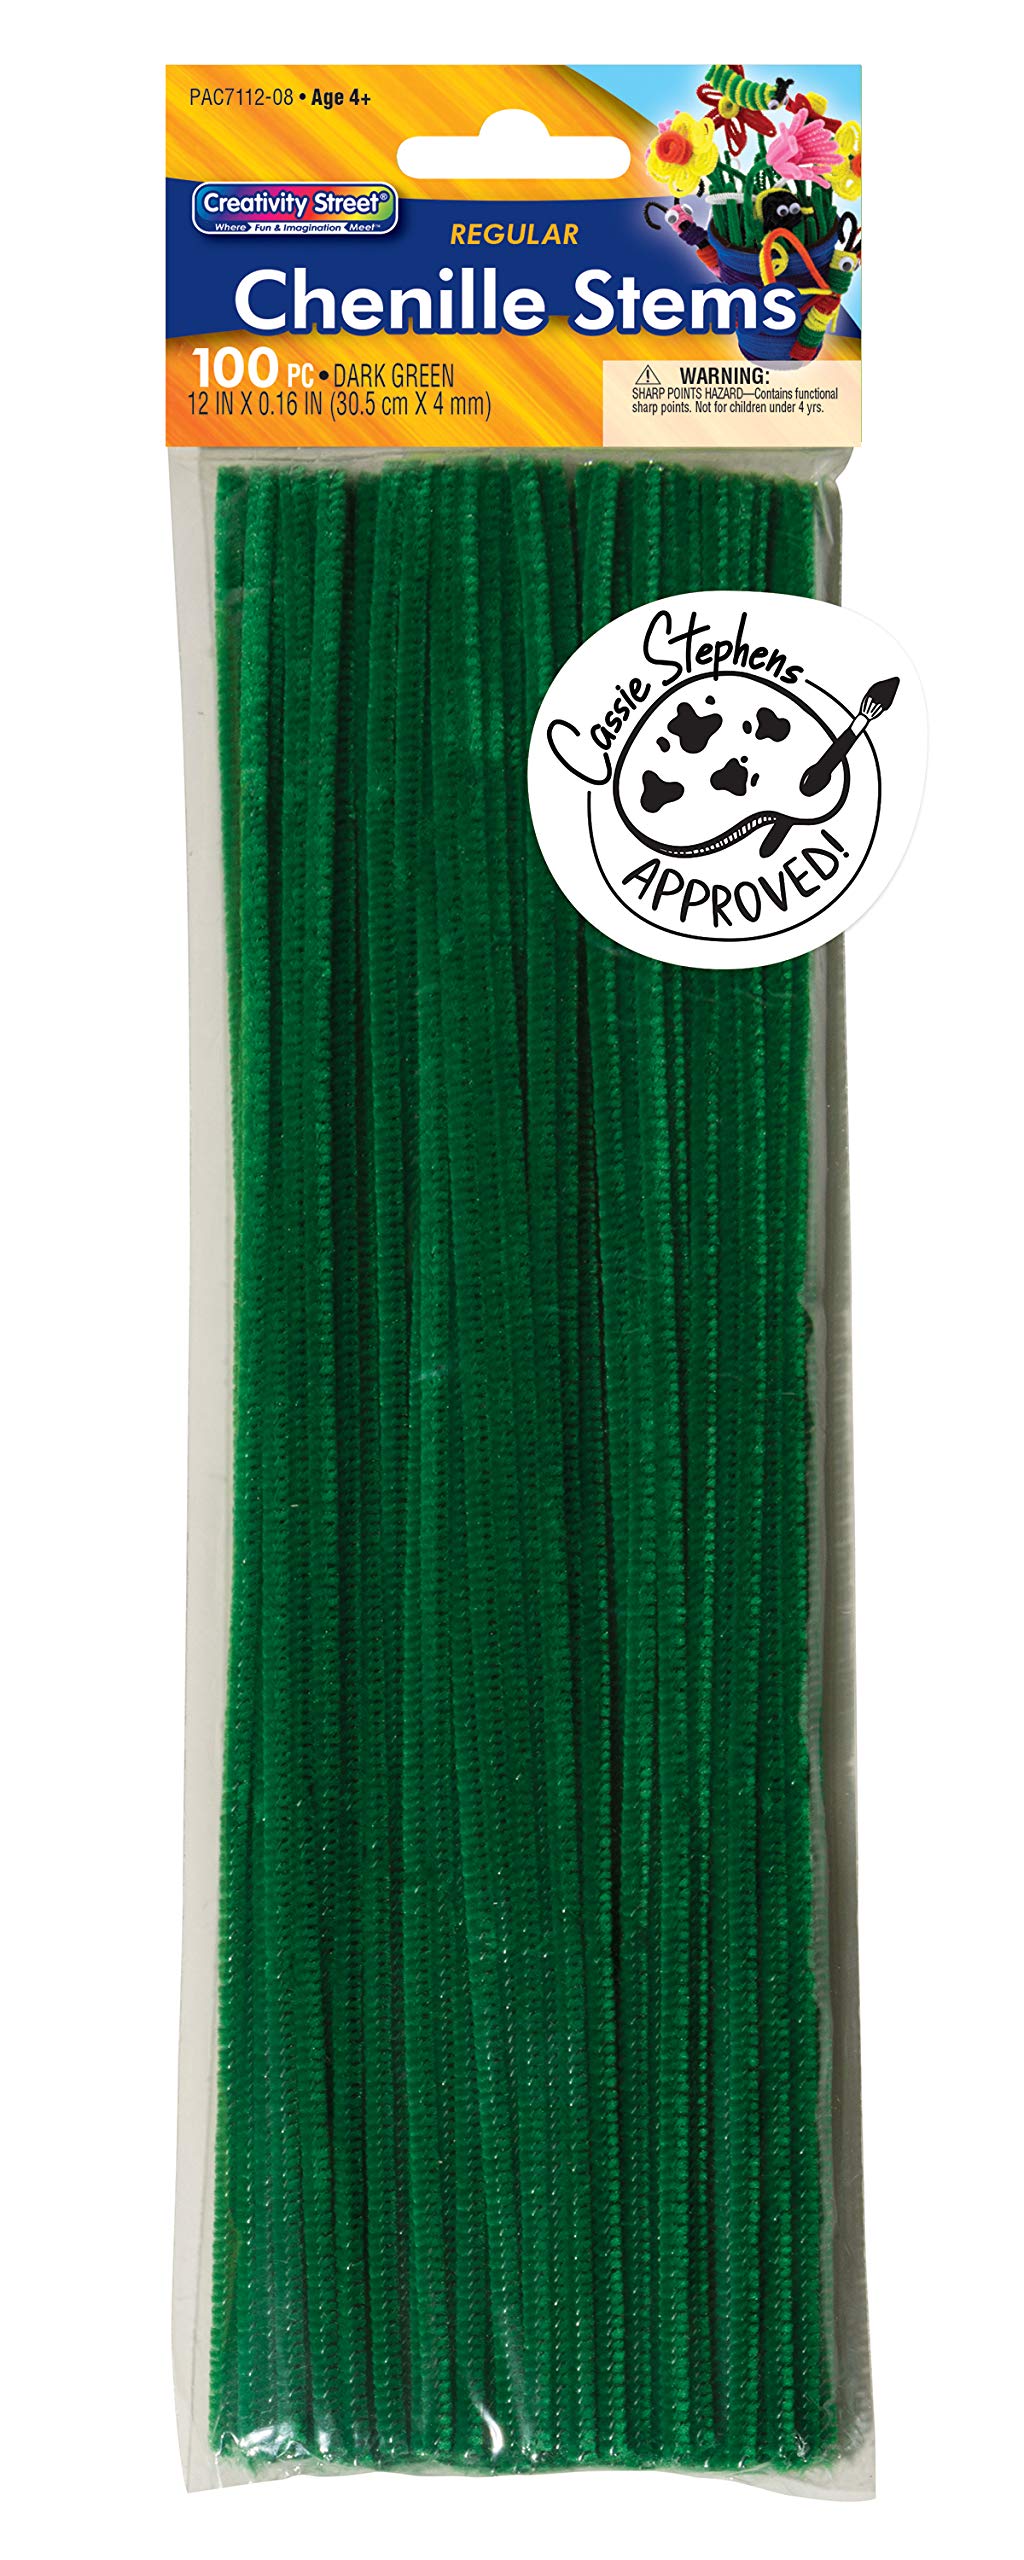 Chenille Stems - pipe cleaners